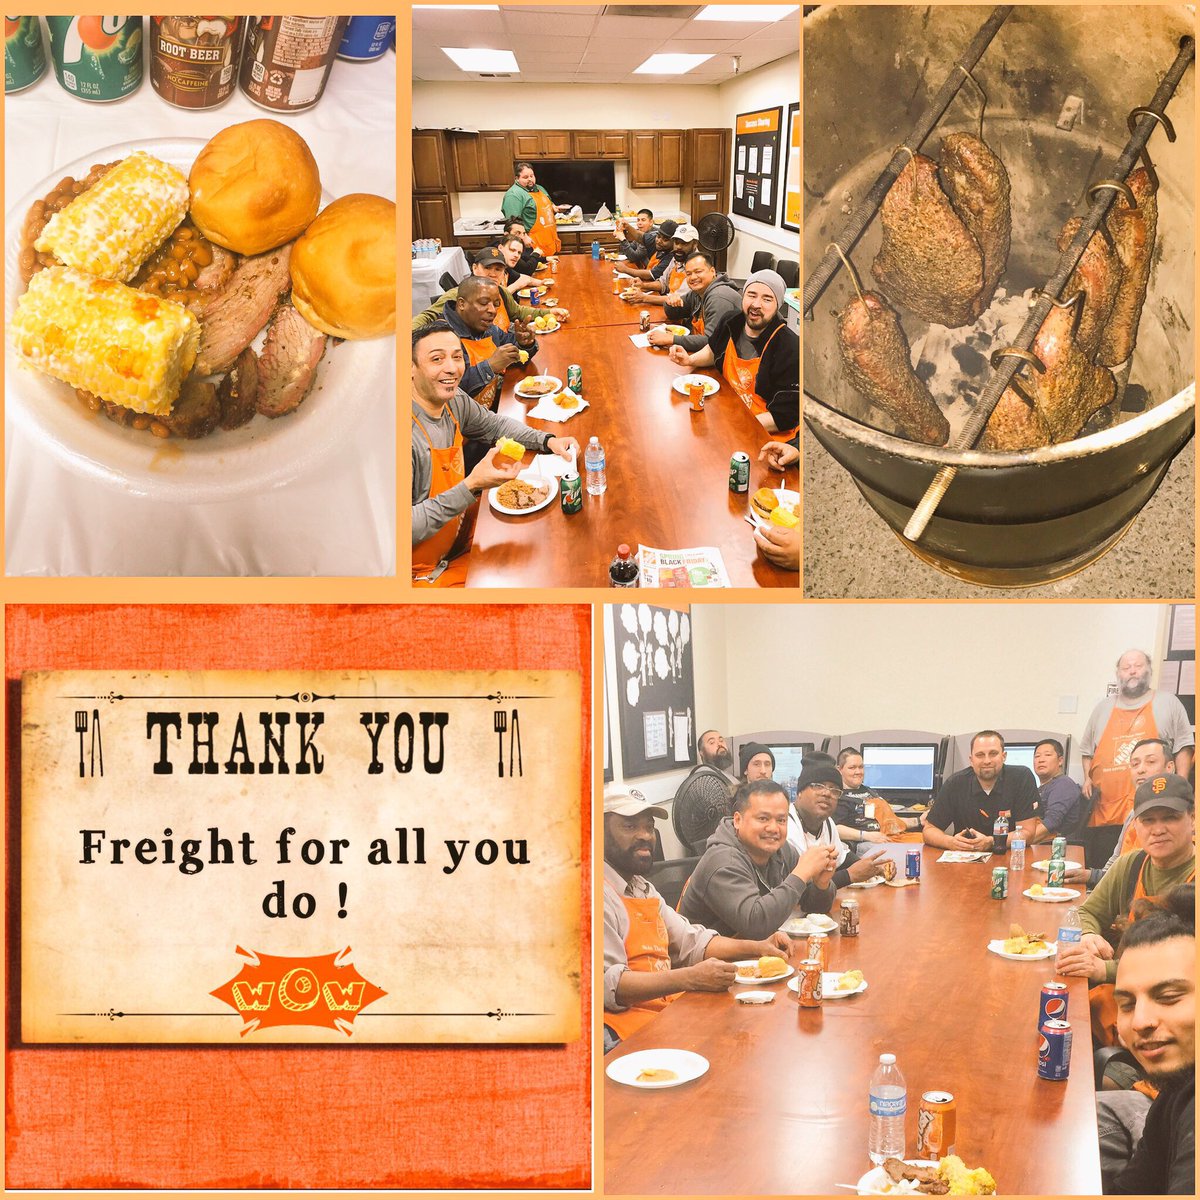 BBQ for Freight 👍🏻Thank u @joshfelkerTHD for coming back 2nite to bbq. What's on your plate ?@btrotter64 @lionel_stevens 😂😎😜#D49 #634proud